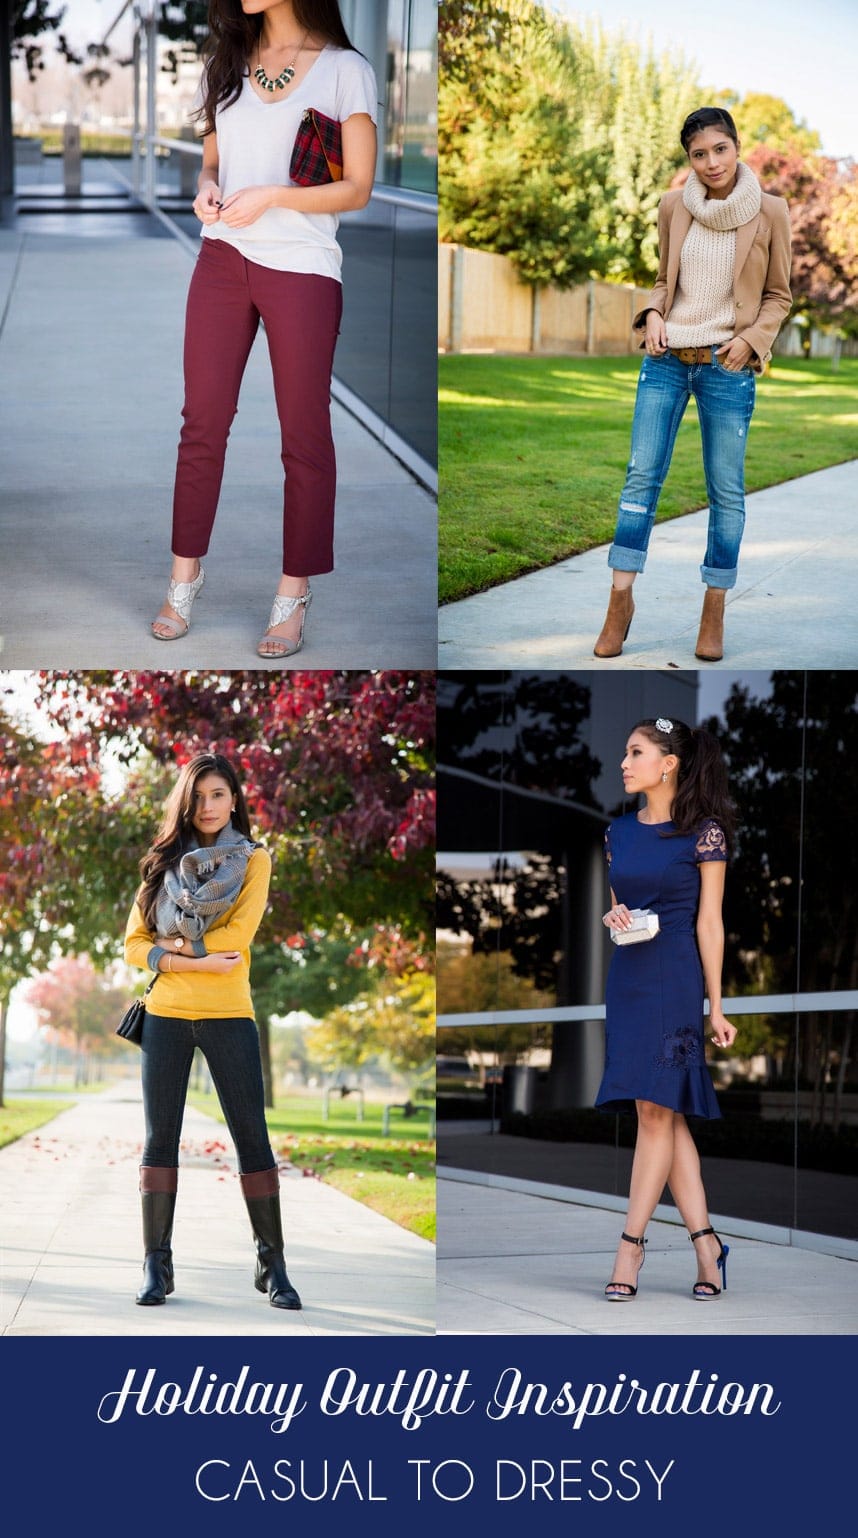 Holiday Outfits for Your Inspiration: Casual to Dressy